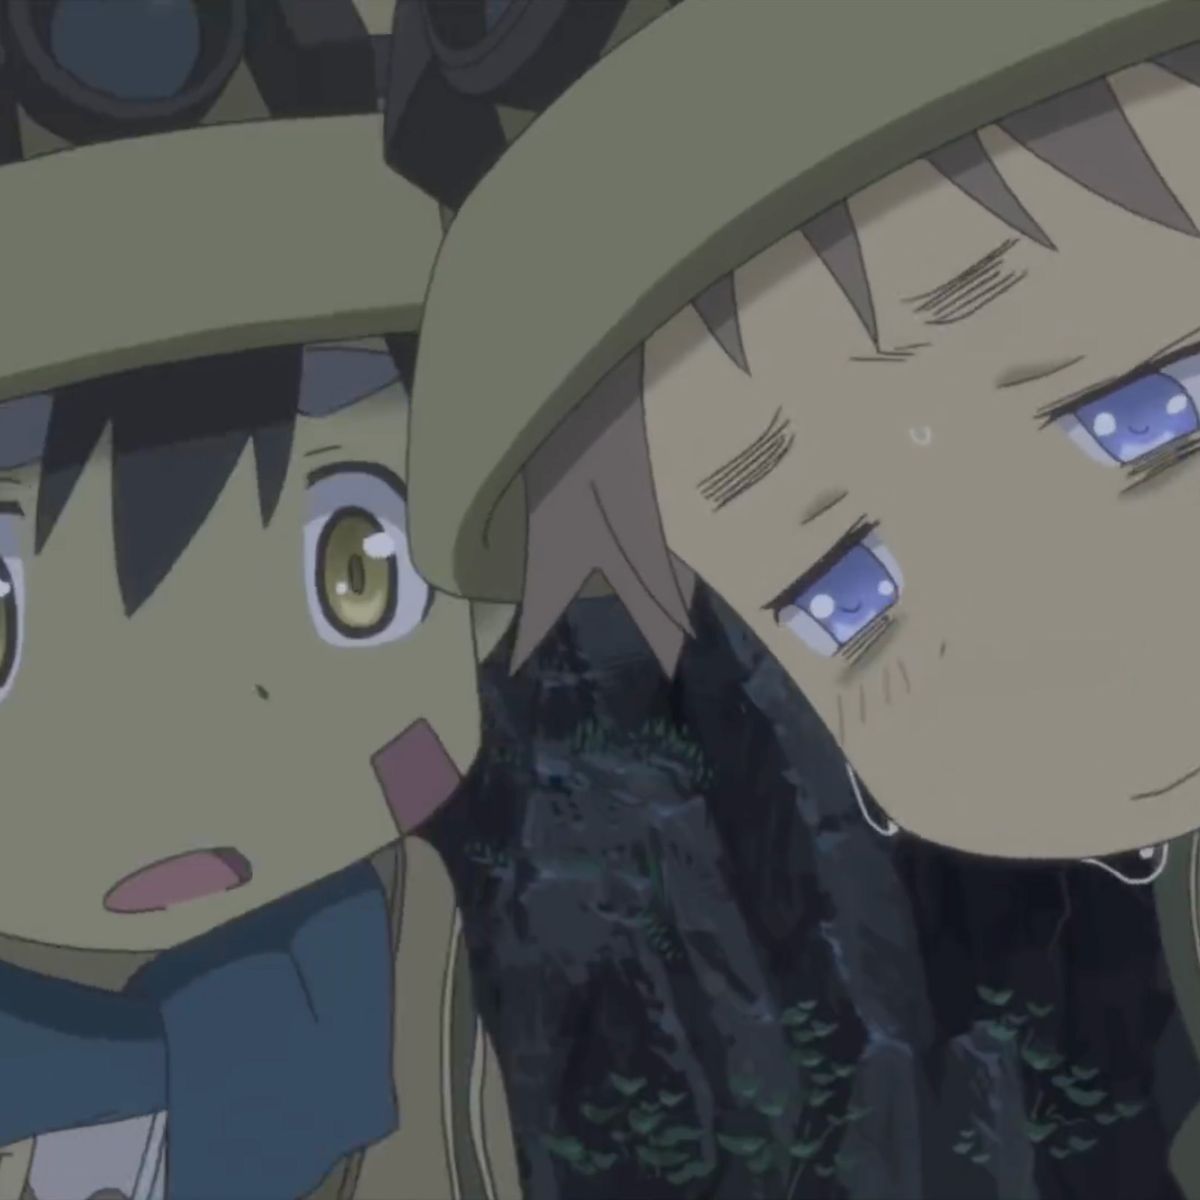 How Important Made In Abyss' Films Are To Season 2's Viewing Order